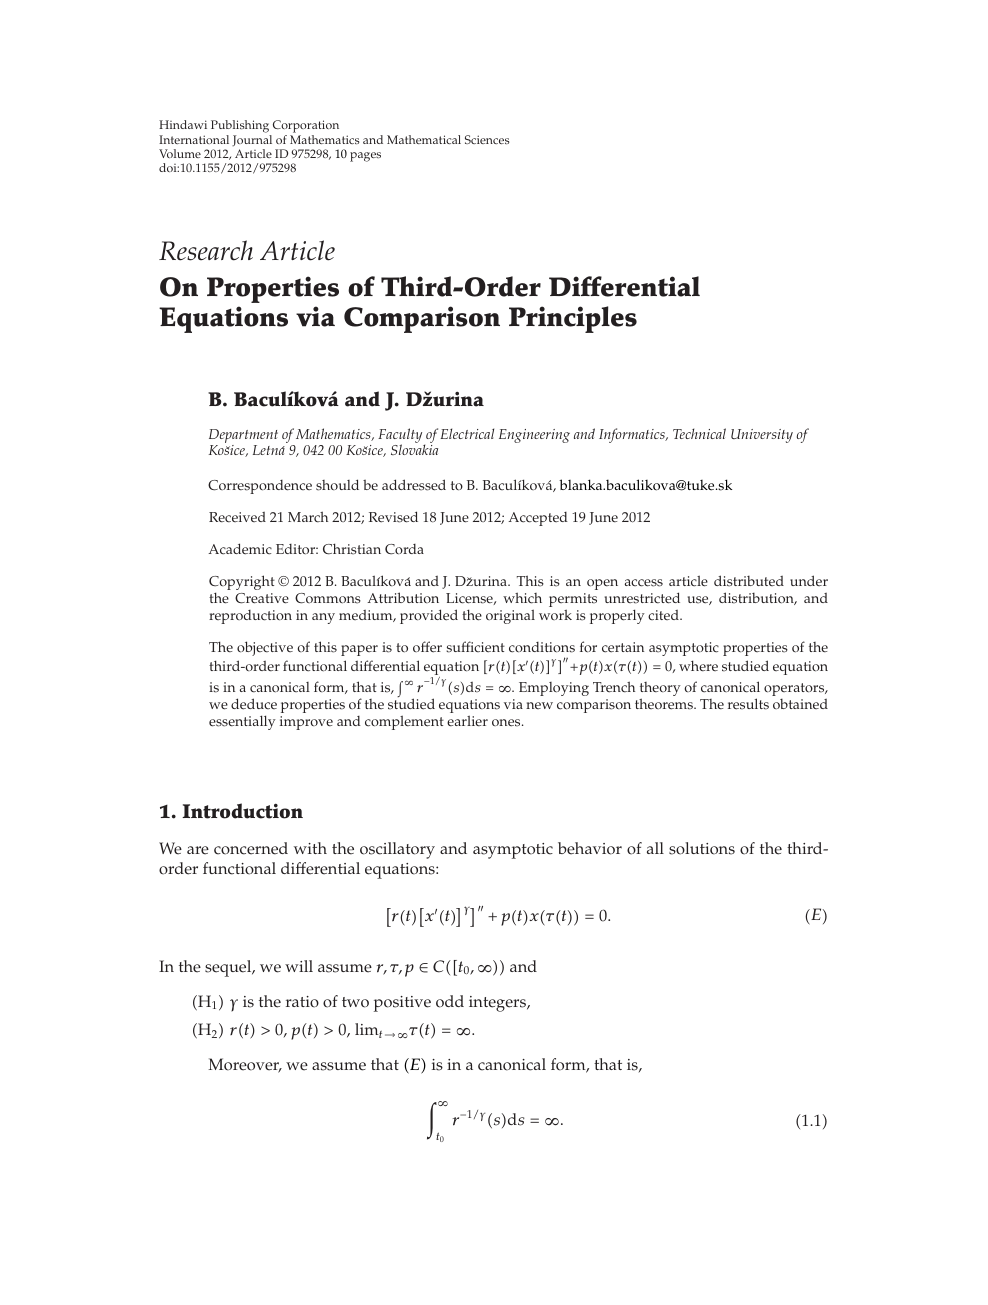 On Properties Of Third Order Differential Equations Via Comparison Principles Topic Of Research Paper In Mathematics Download Scholarly Article Pdf And Read For Free On Cyberleninka Open Science Hub